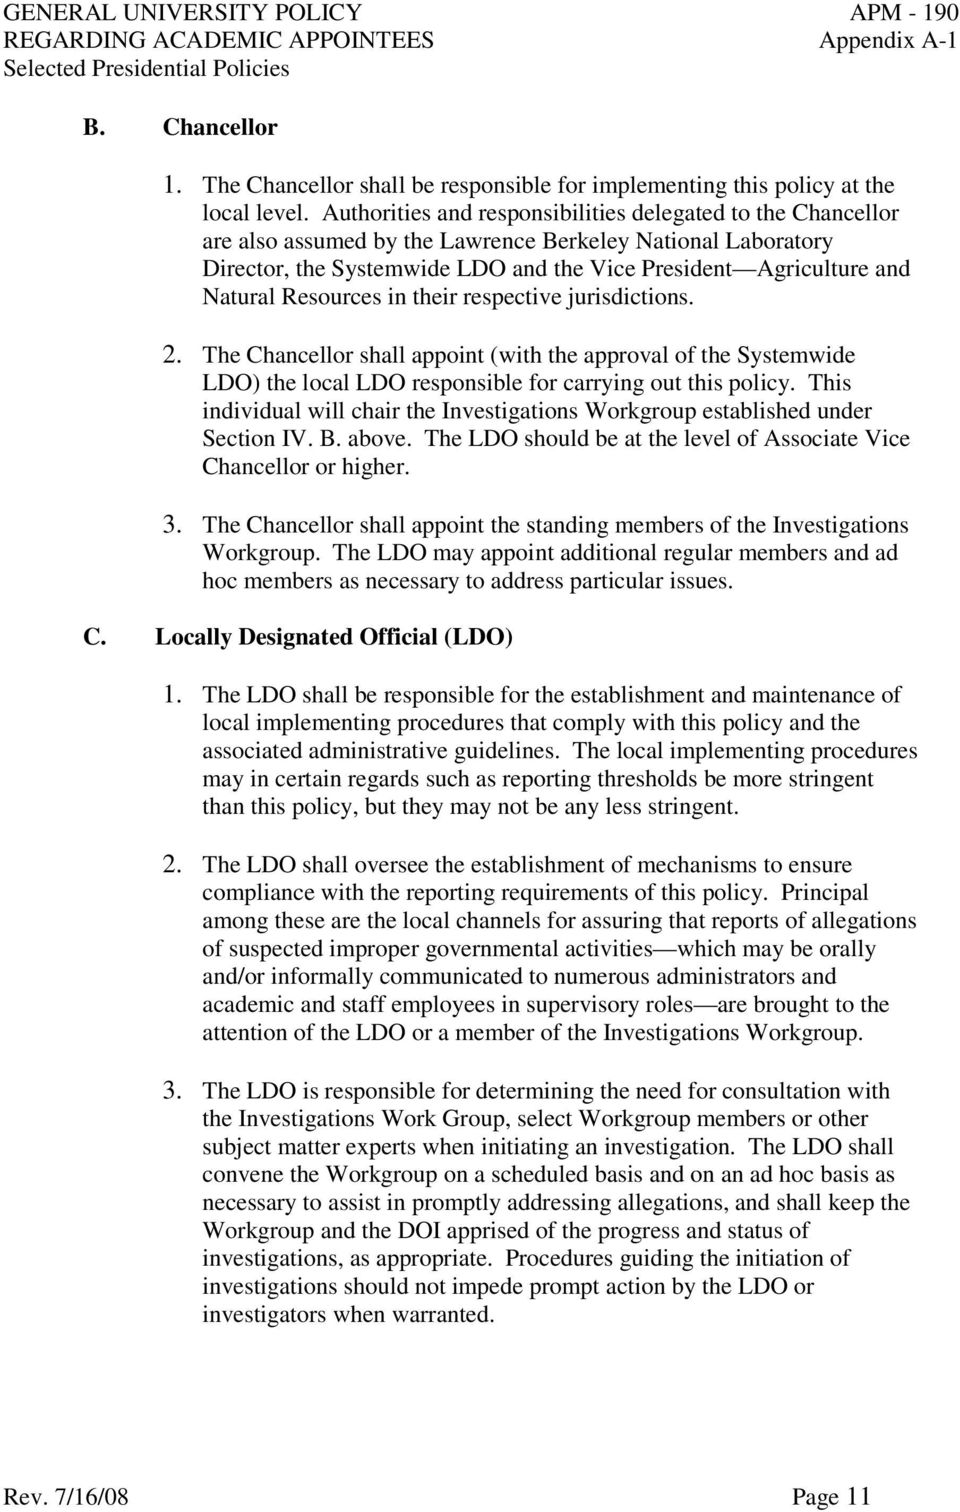 Resources in their respective jurisdictions. 2. The Chancellor shall appoint (with the approval of the Systemwide LDO) the local LDO responsible for carrying out this policy.